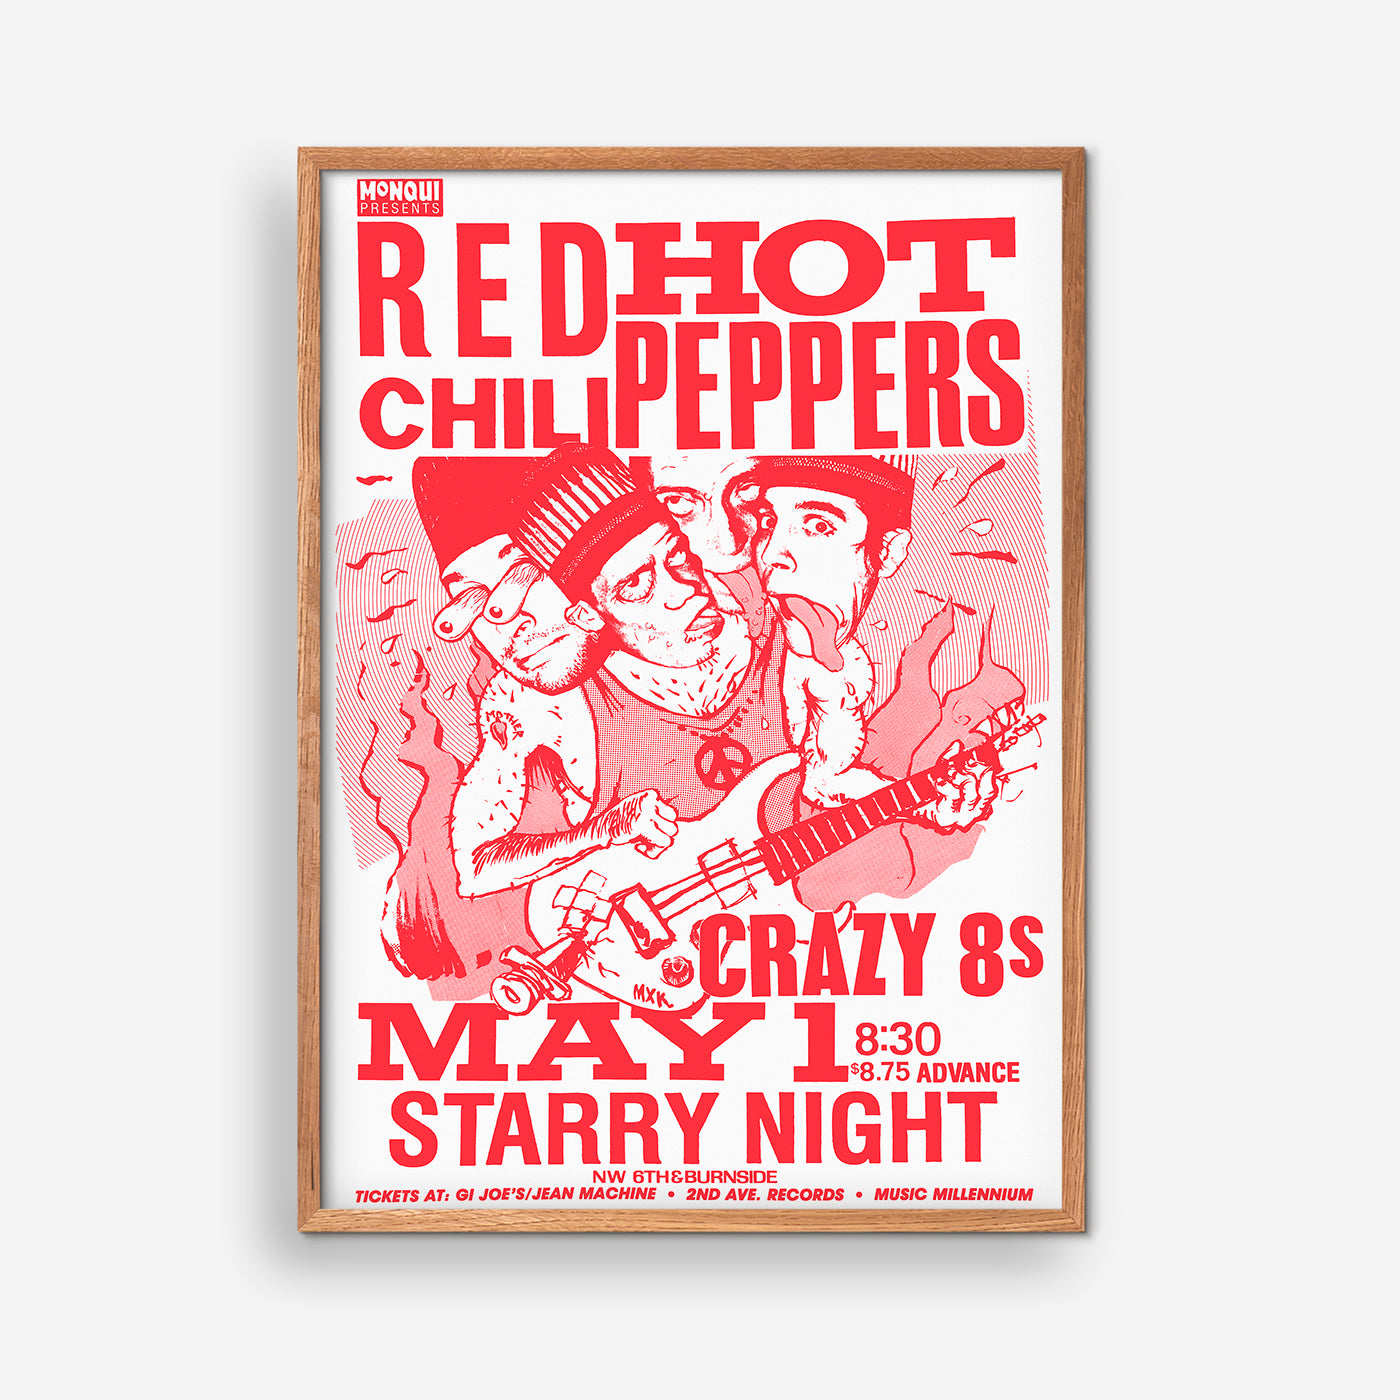 Red Hot Chilli Peppers concert poster